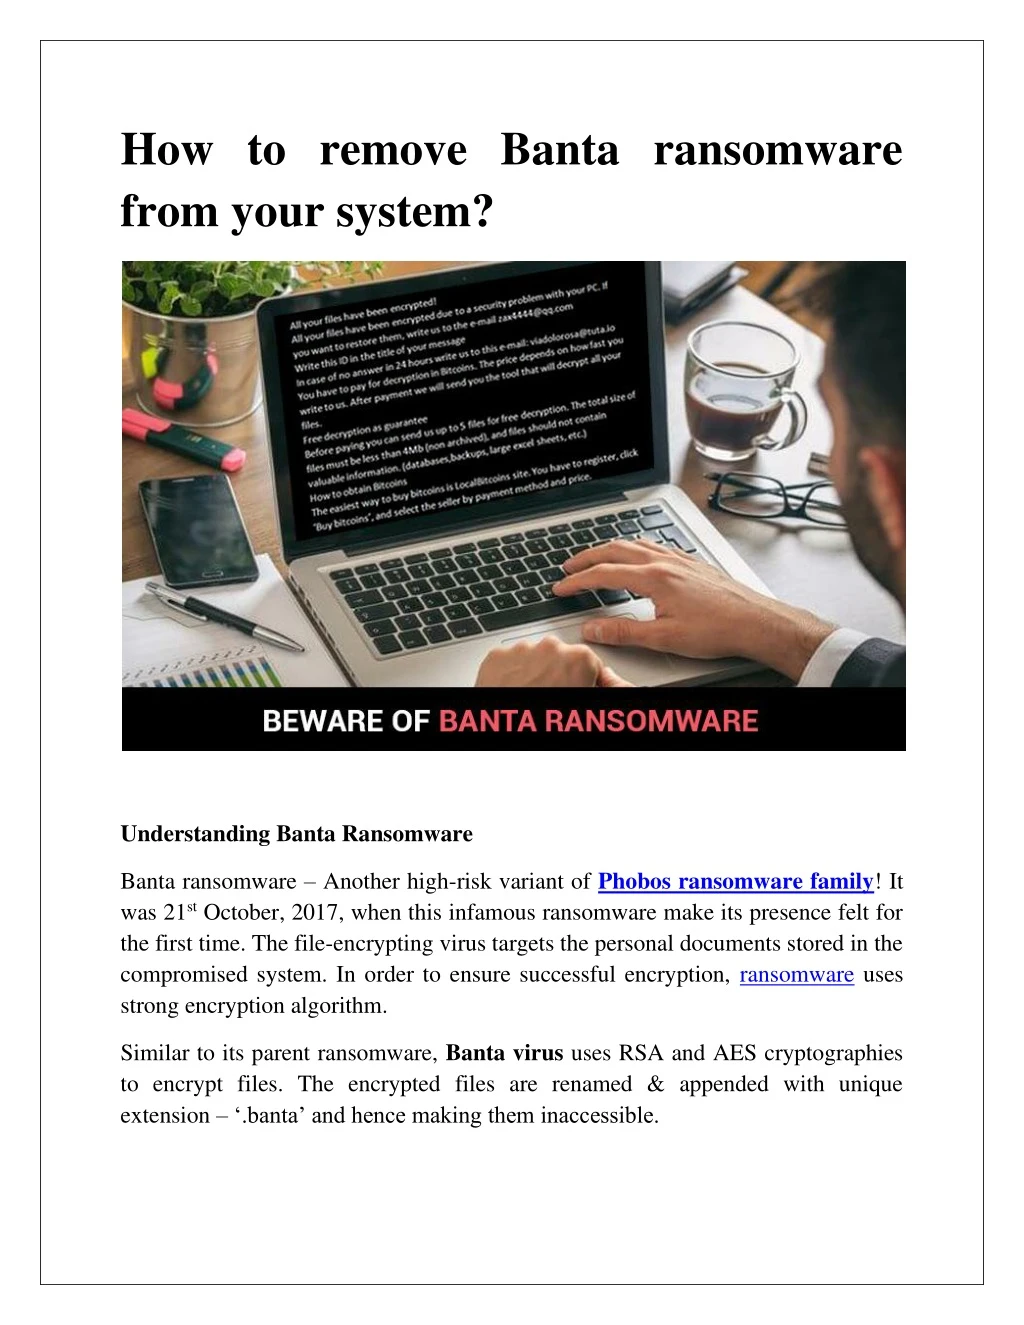 how to remove banta ransomware from your system